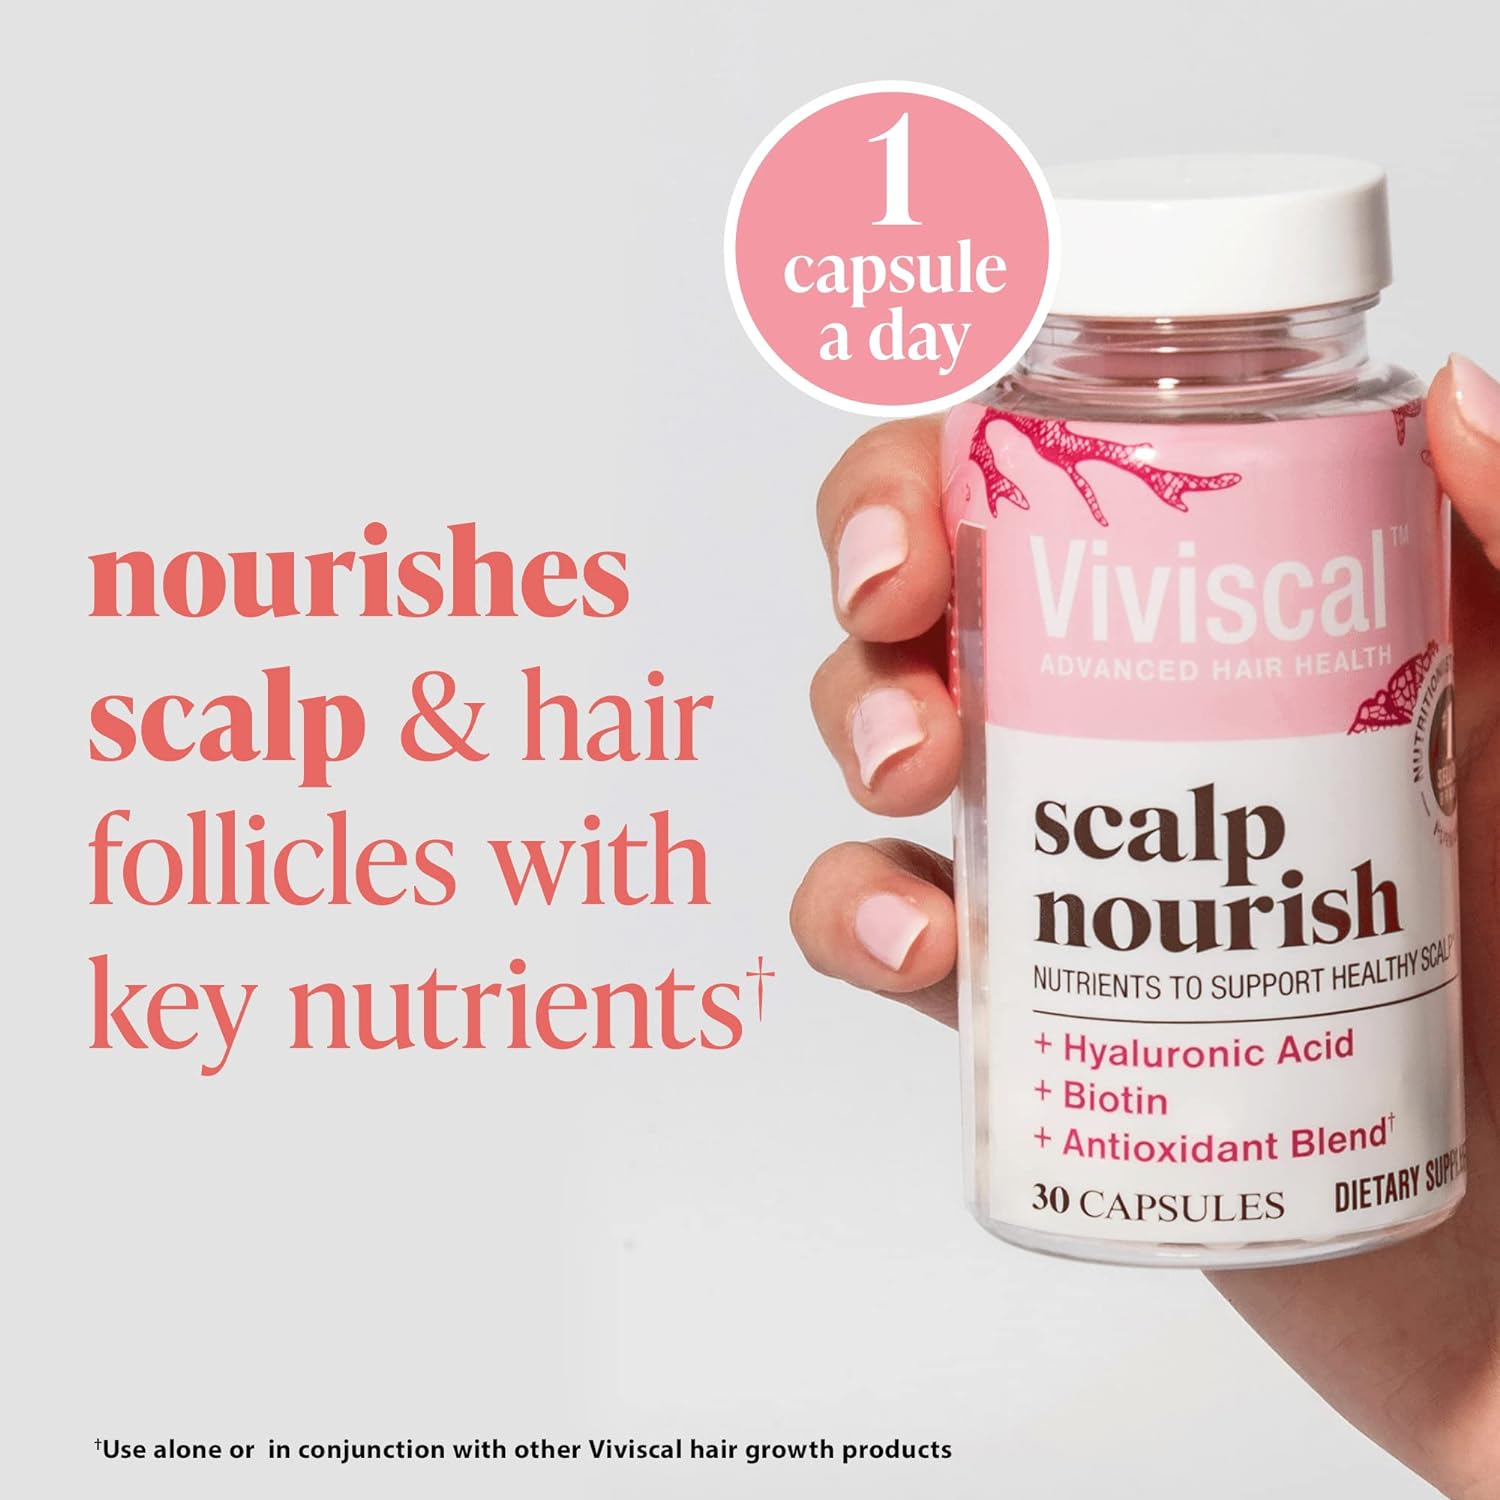 nourishes scalp and hair follicles with key nutrients with viviscal scalp nourish with one capsule a day